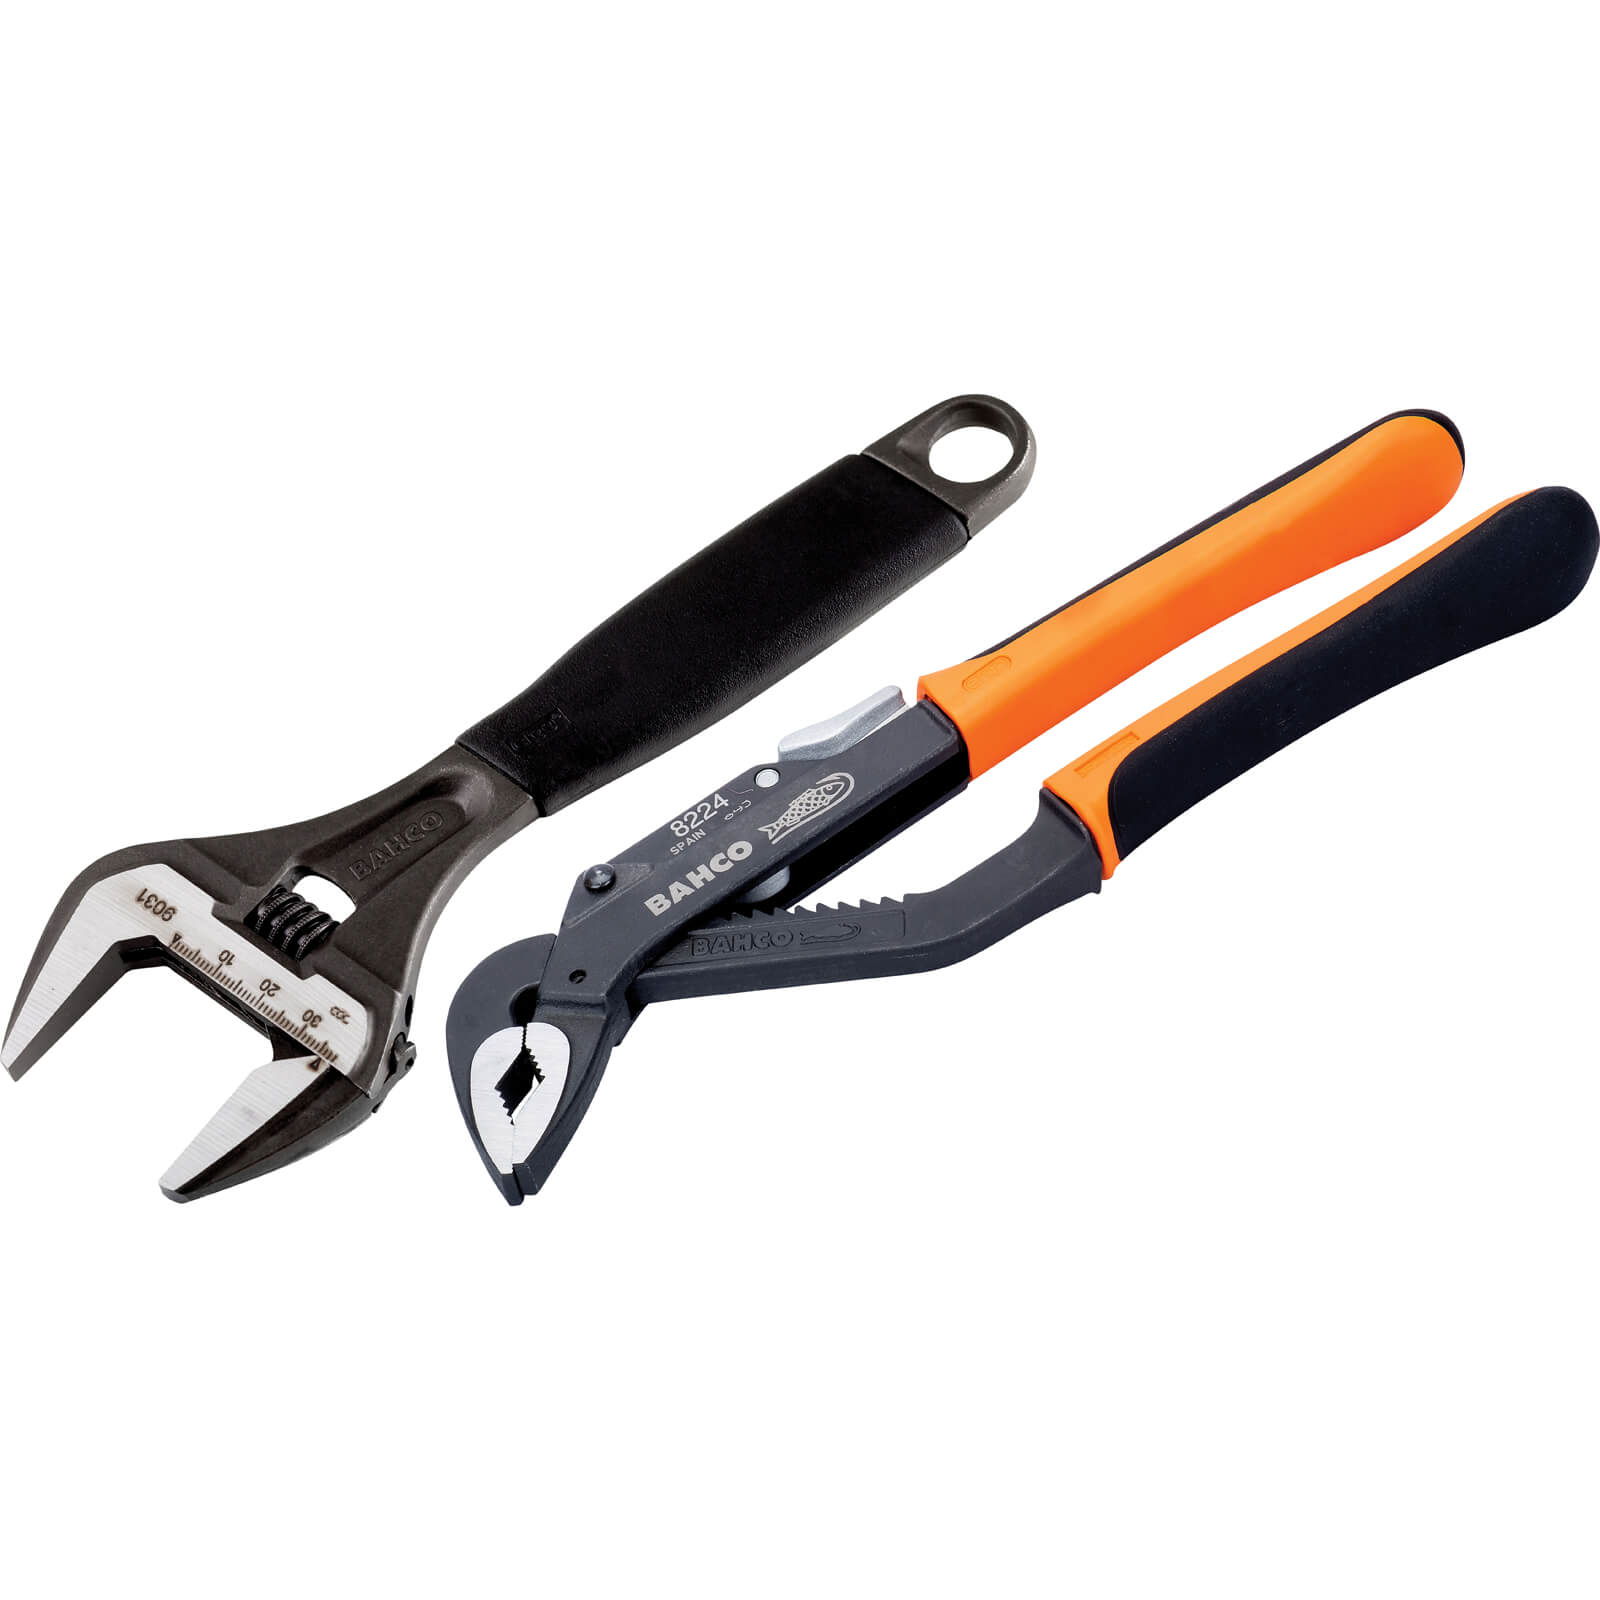 Bahco 2 Piece Water Pump Pliers and Adjustable Wrench Set